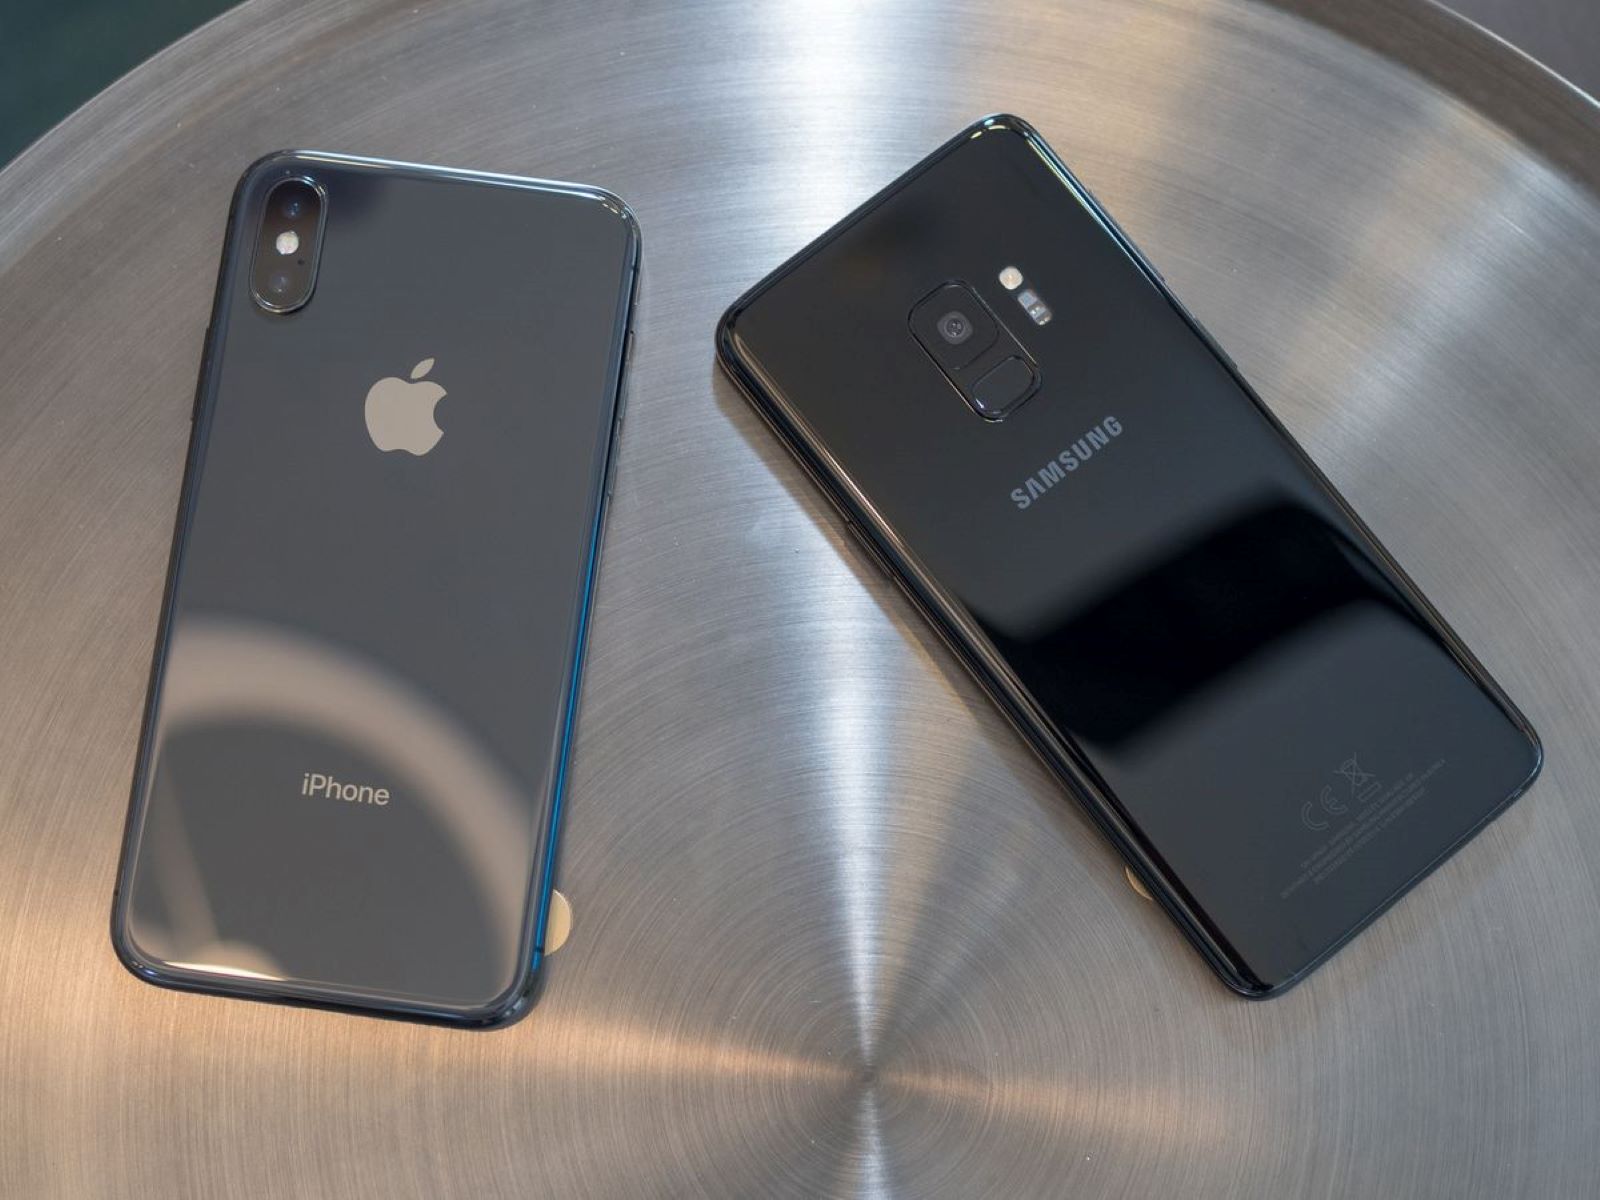 Smartphone Showdown: Comparing The S9 To IPhone 10